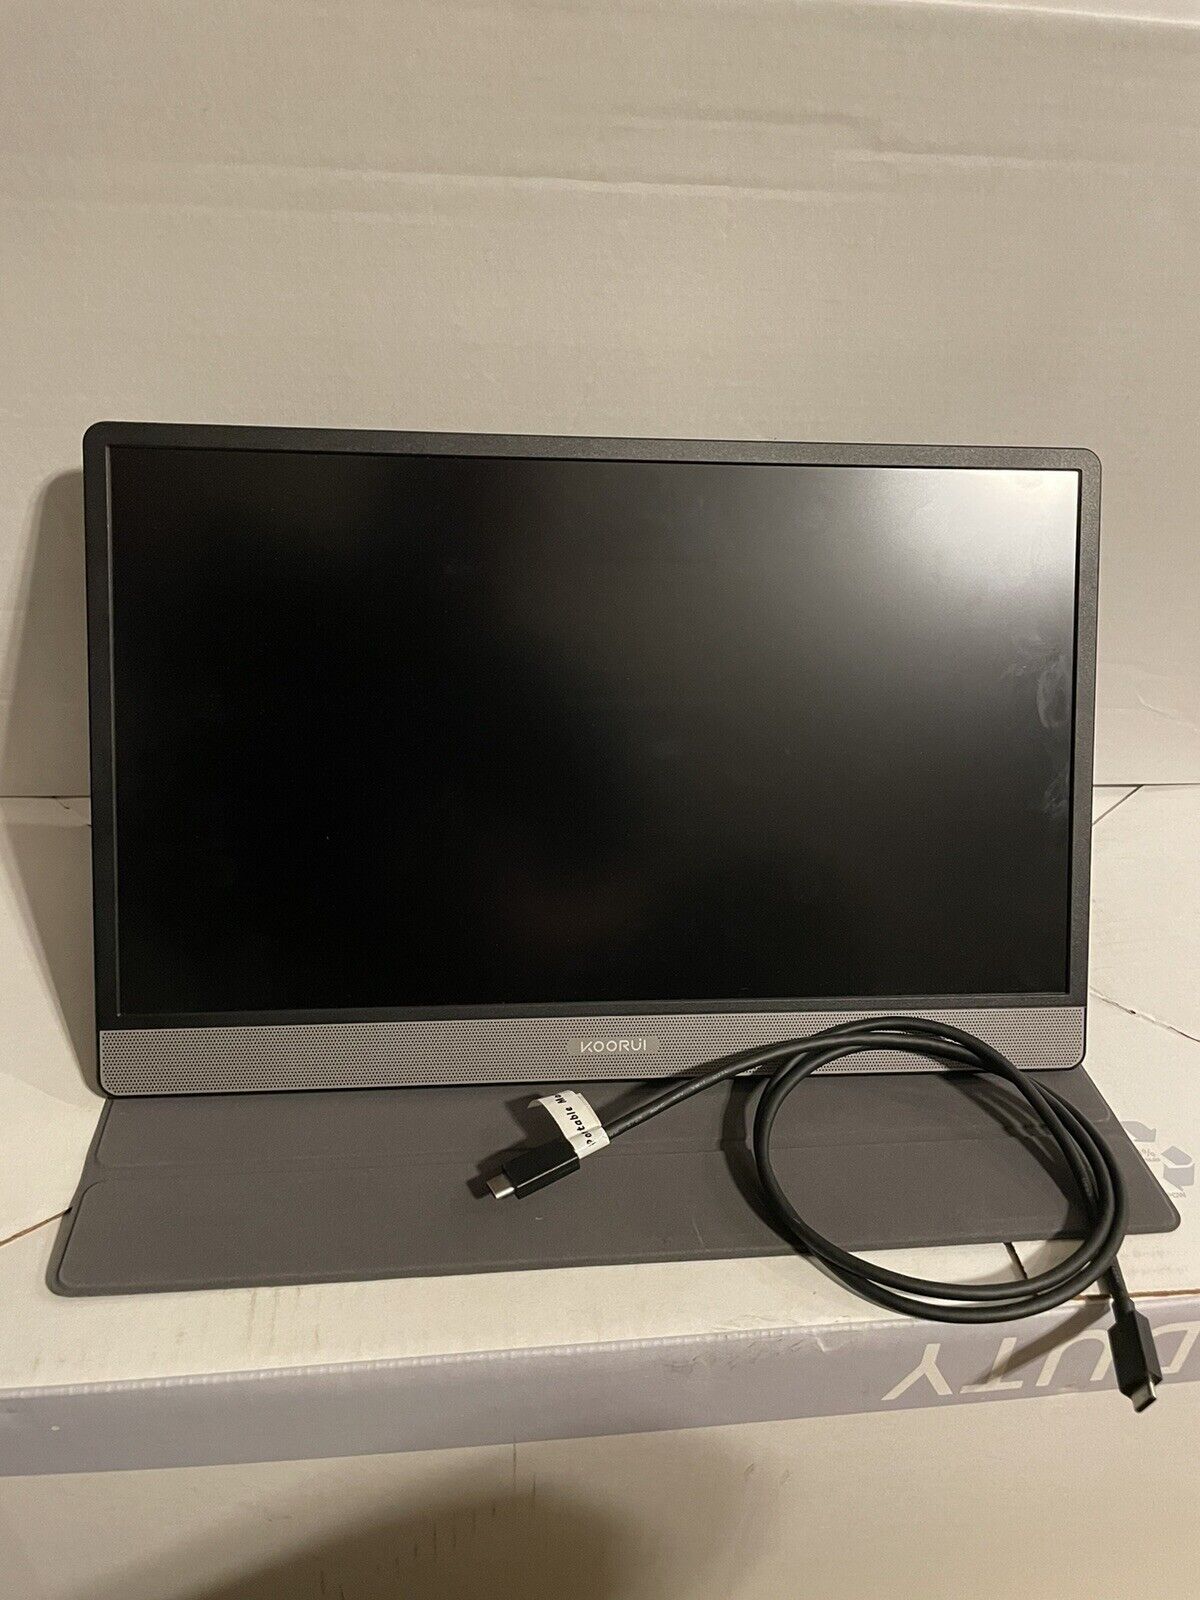 KOORUI Portable Monitor 15.6inch FHD Inch  Laptop  w/ cover/stand W/cable